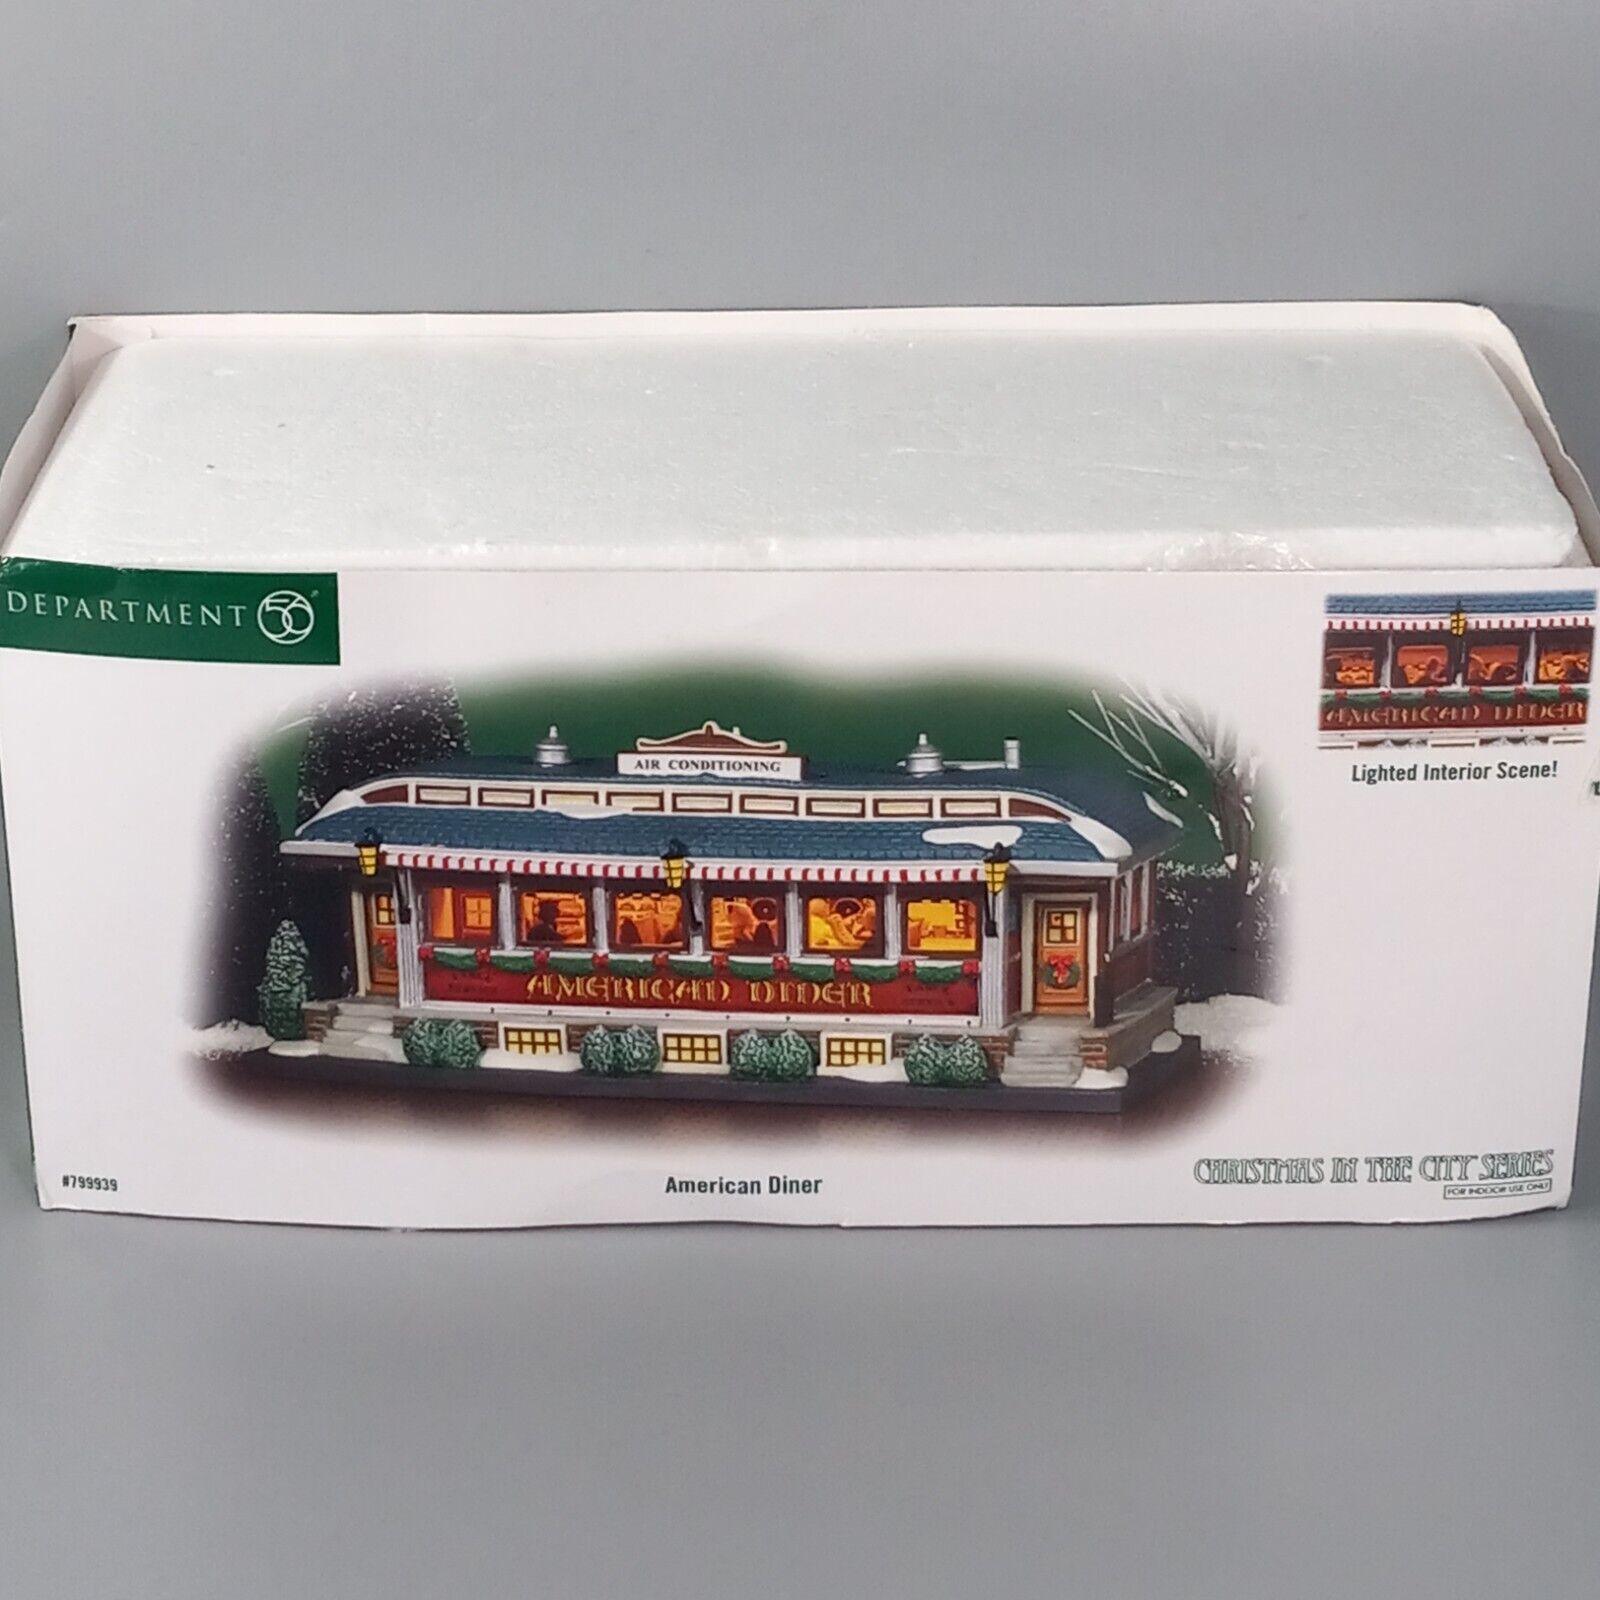 Department 56 Snow Village American Diner Xmas in the City Series Lighted 799939